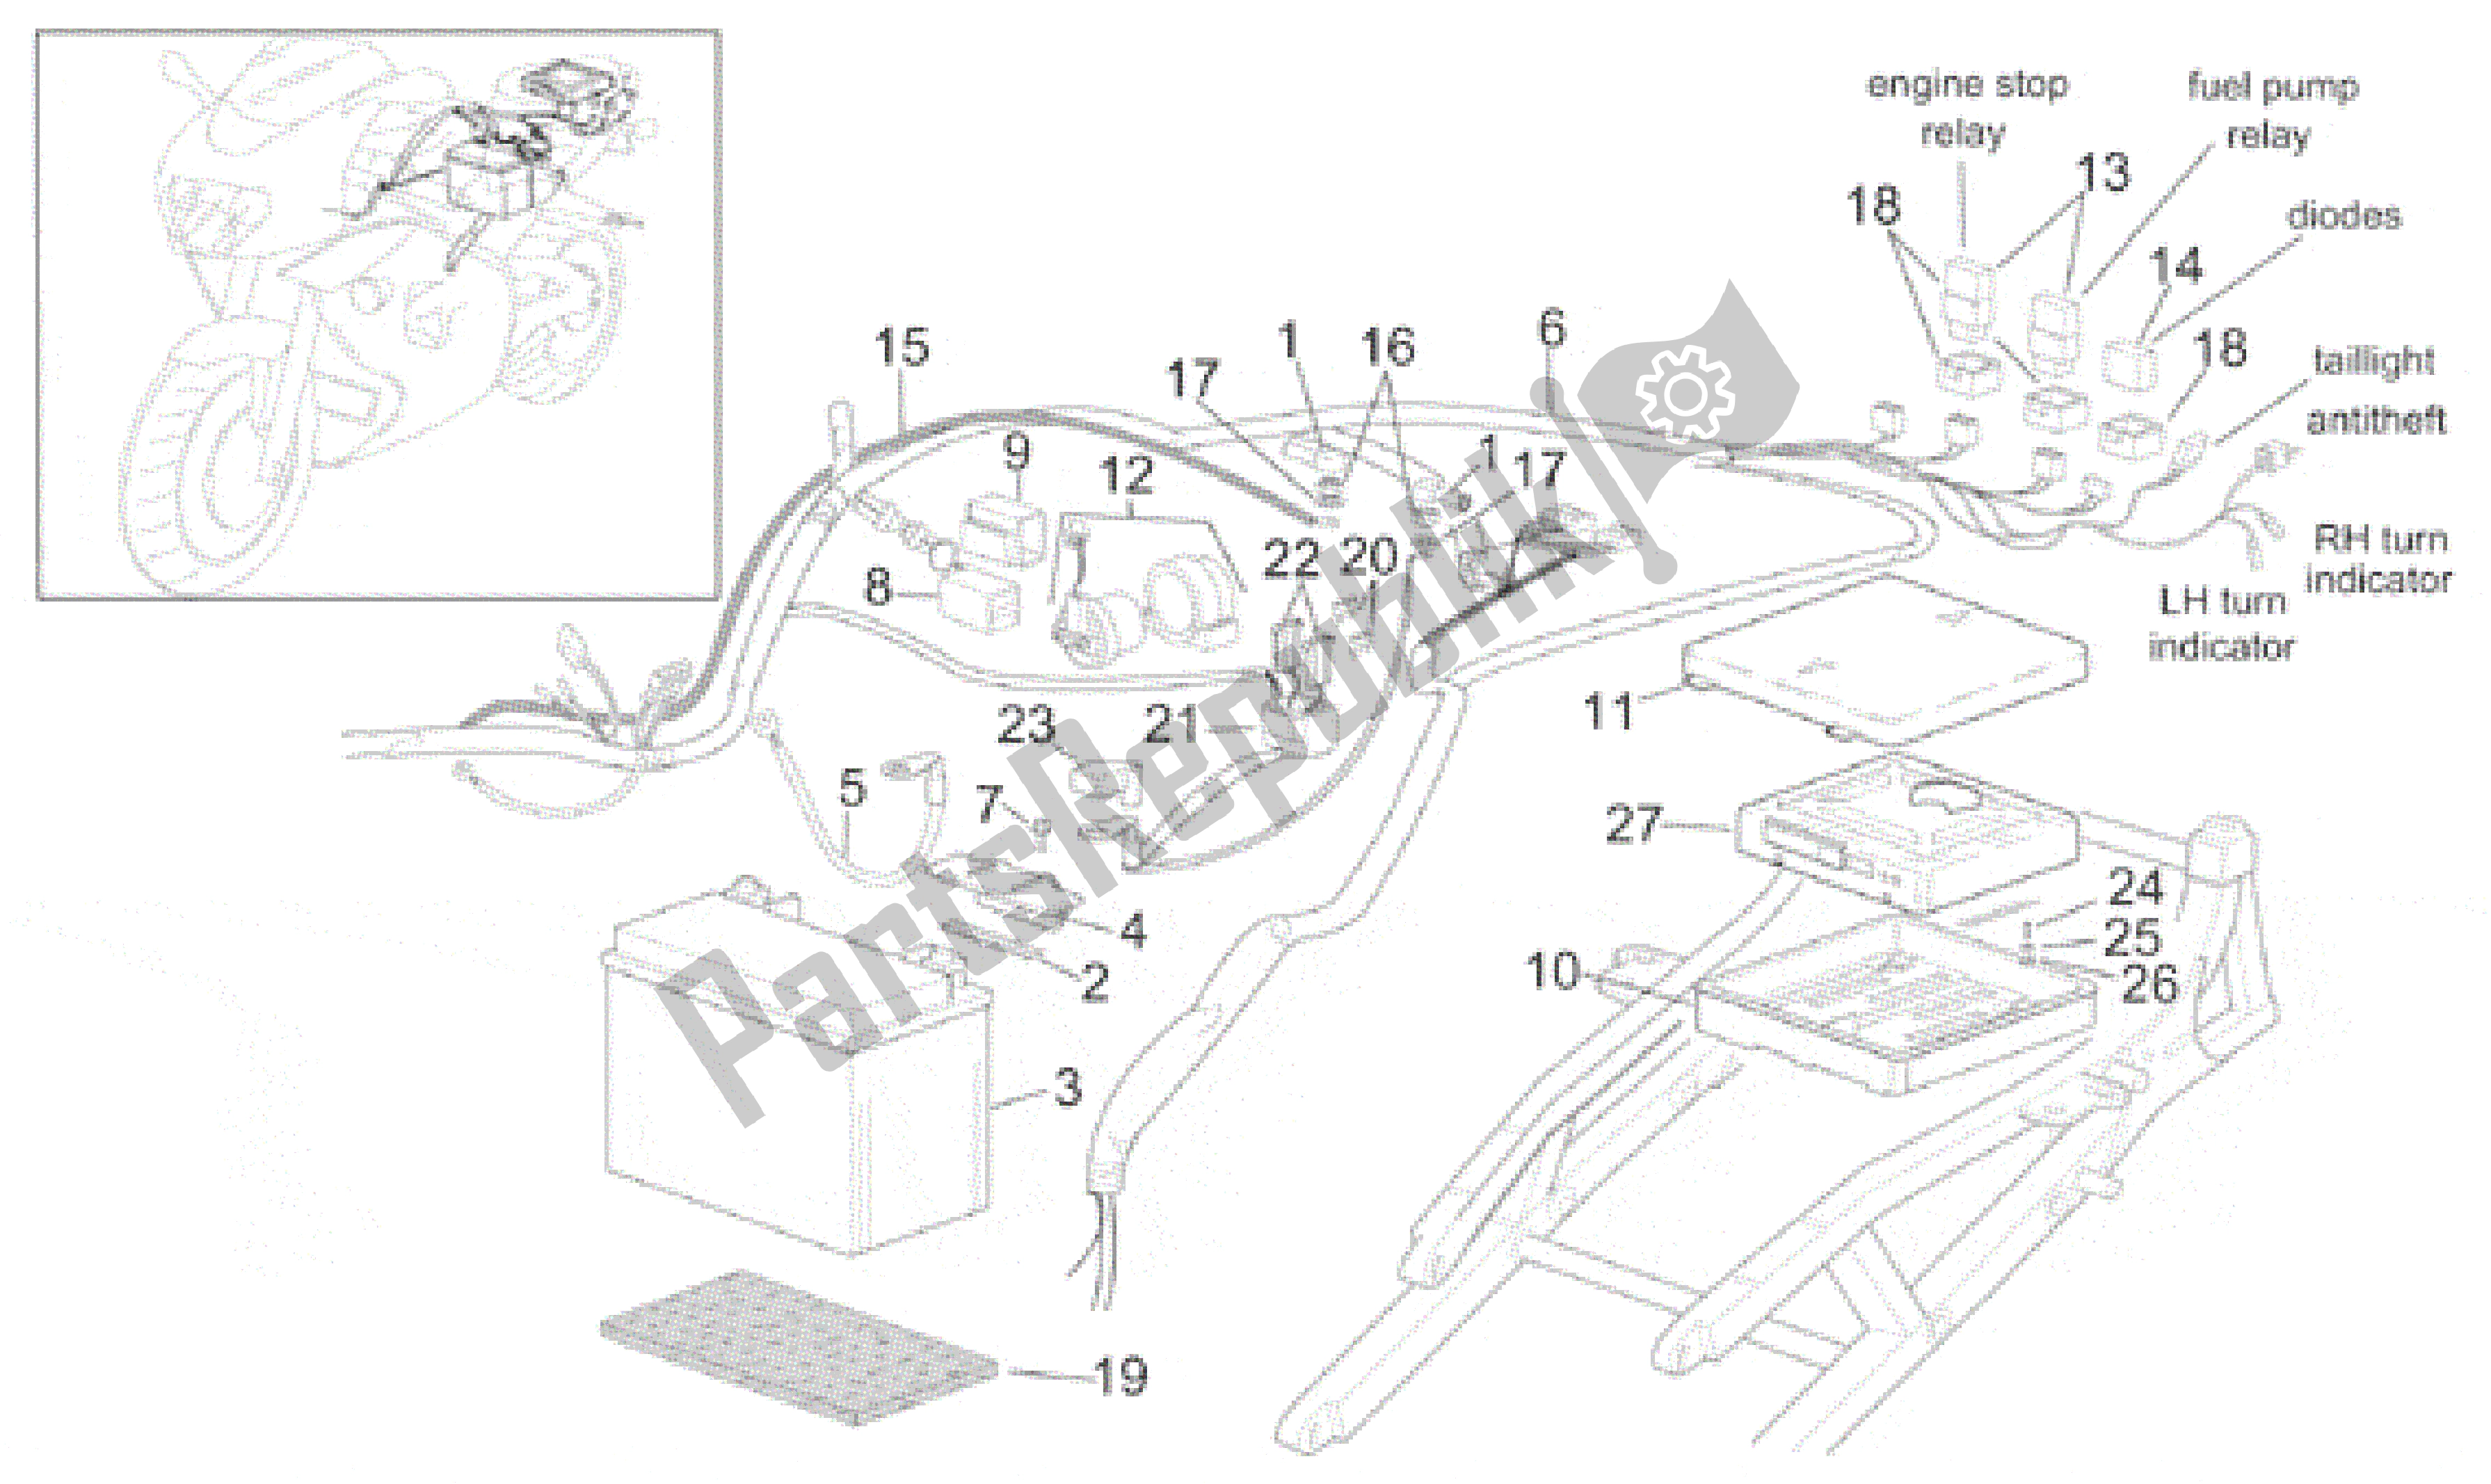 All parts for the Rear Electrical System of the Aprilia RSV Mille SP 391 X 1000 1999 - 2000